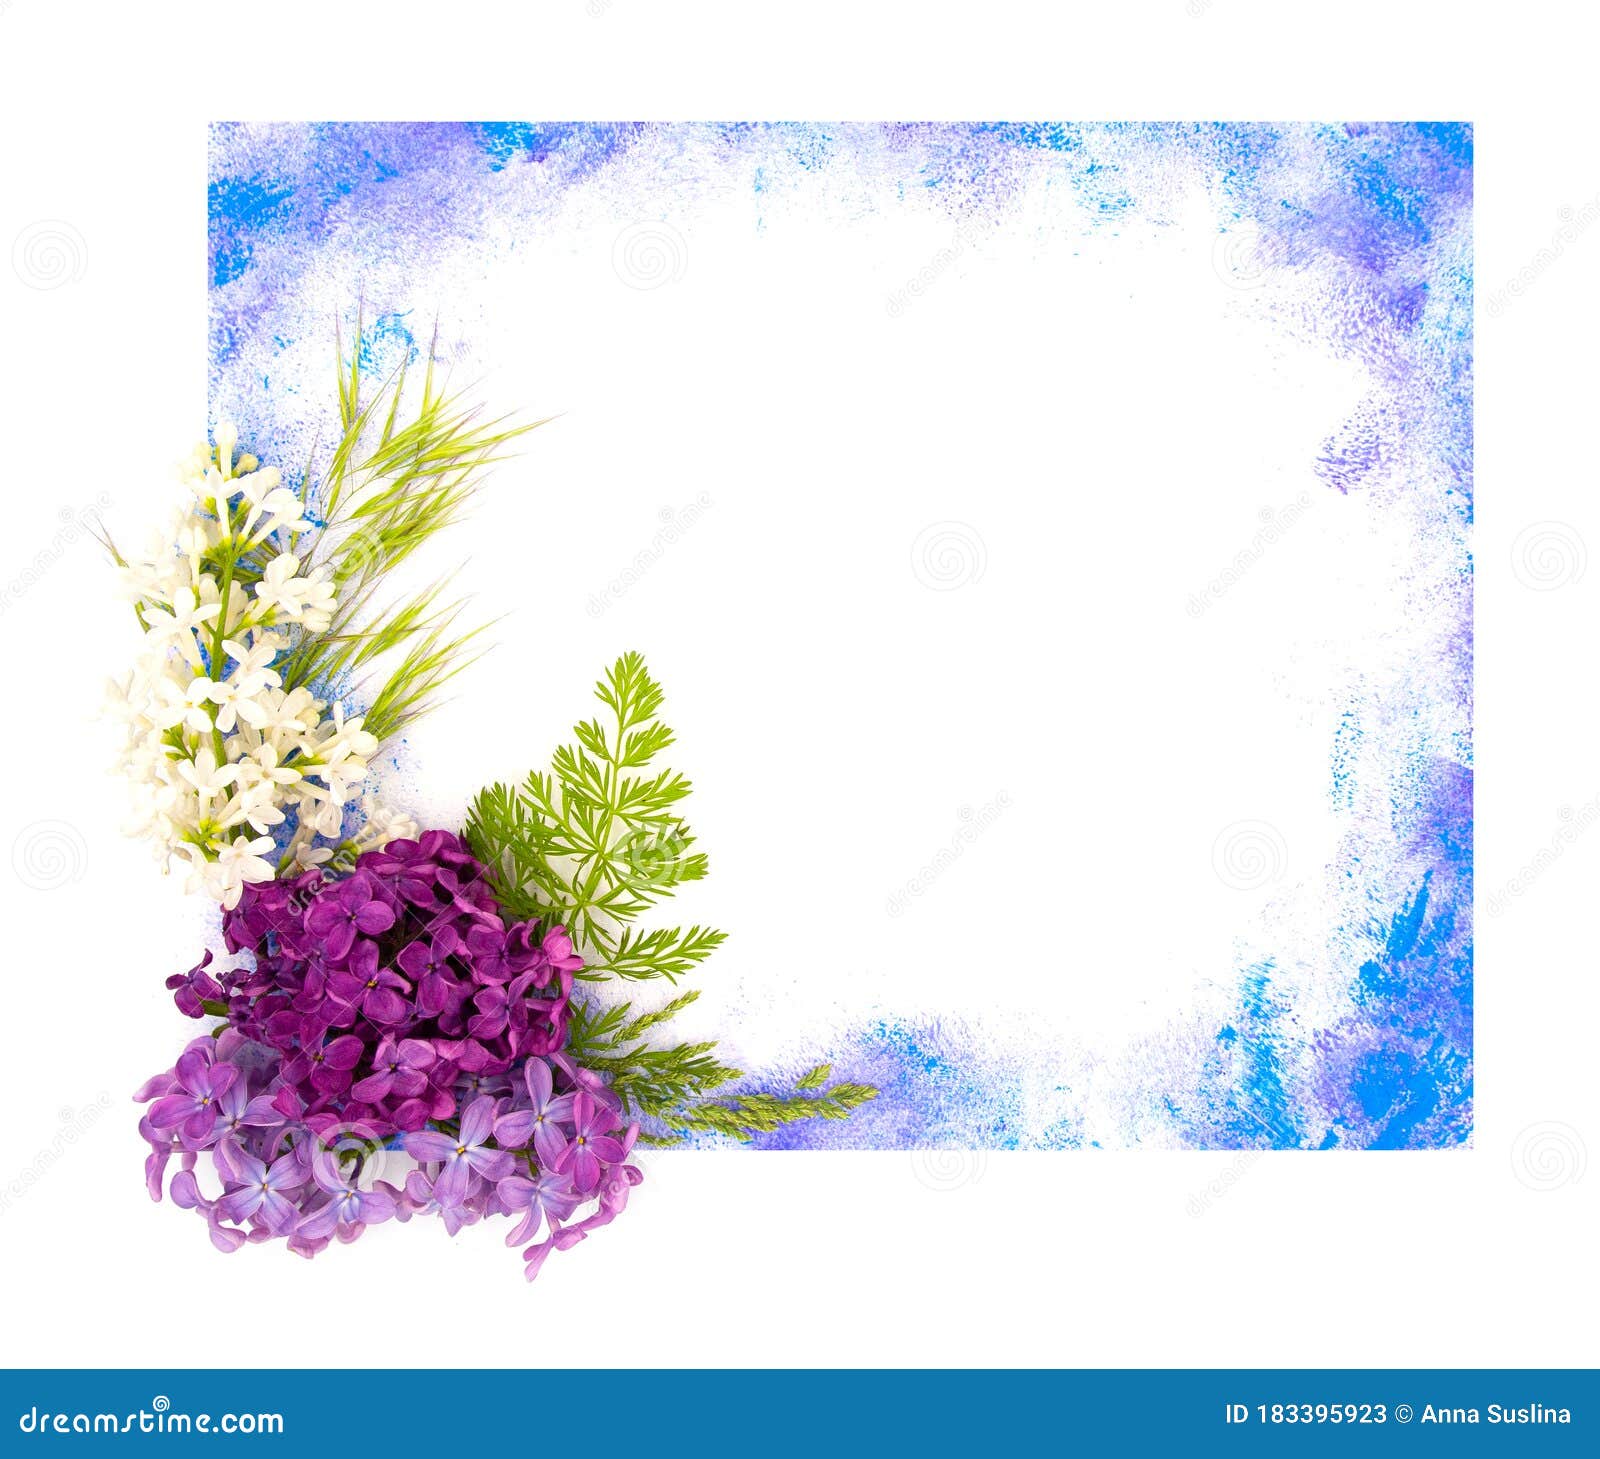 Purple Violet Lilac Spring Flowers and Hand Painted Watercolor Blot Spot on  White Background. A4 Paper Size Border Frame Photo Stock Image - Image of  bright, background: 183395923